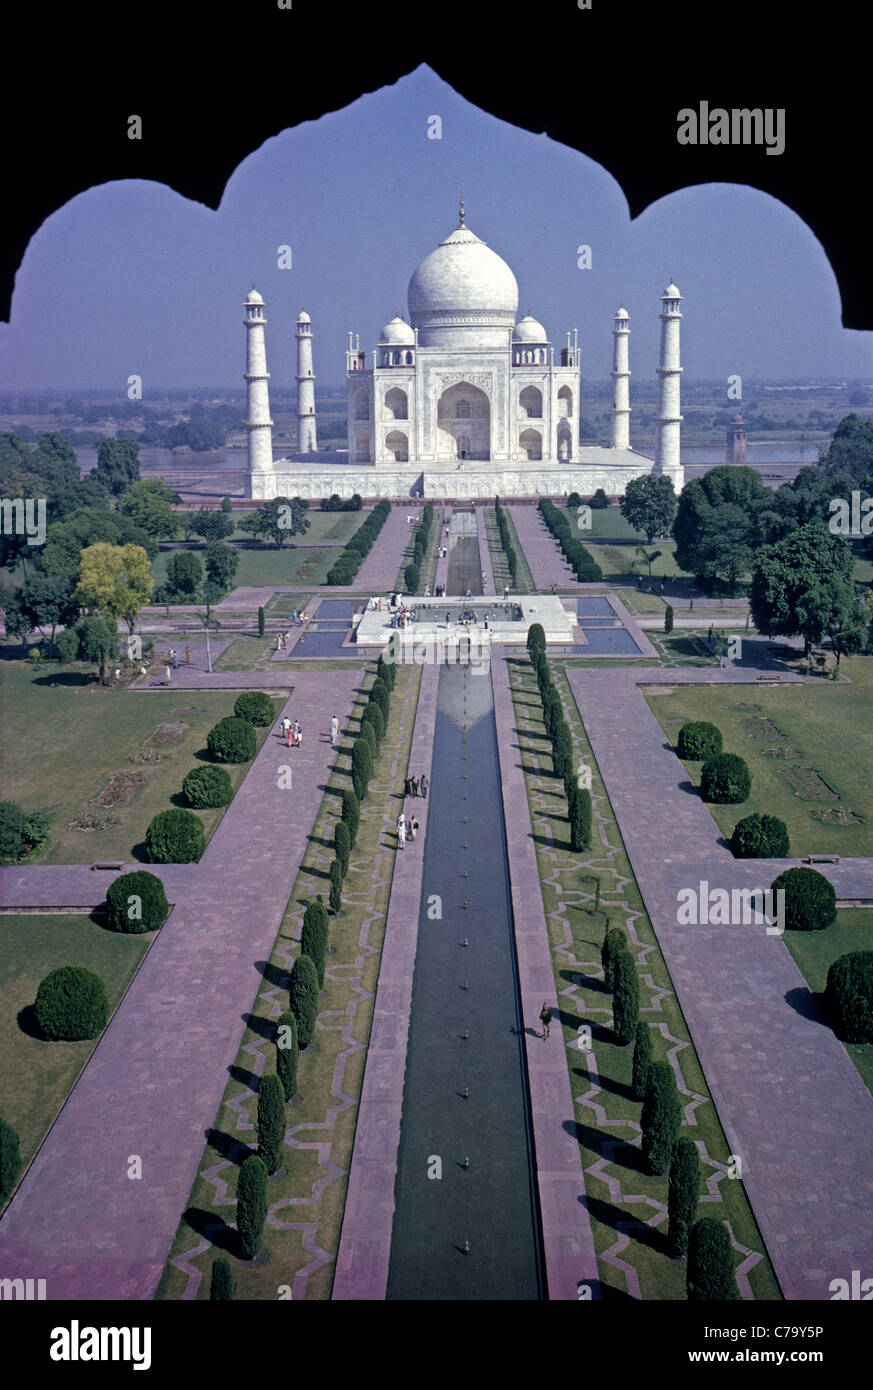 The Taj Mahal is the world-famous white-marble mausoleum built in the mid-1600s in Agra, India, by Mogul emperor Shan Jahan to honor his third wife. Stock Photo